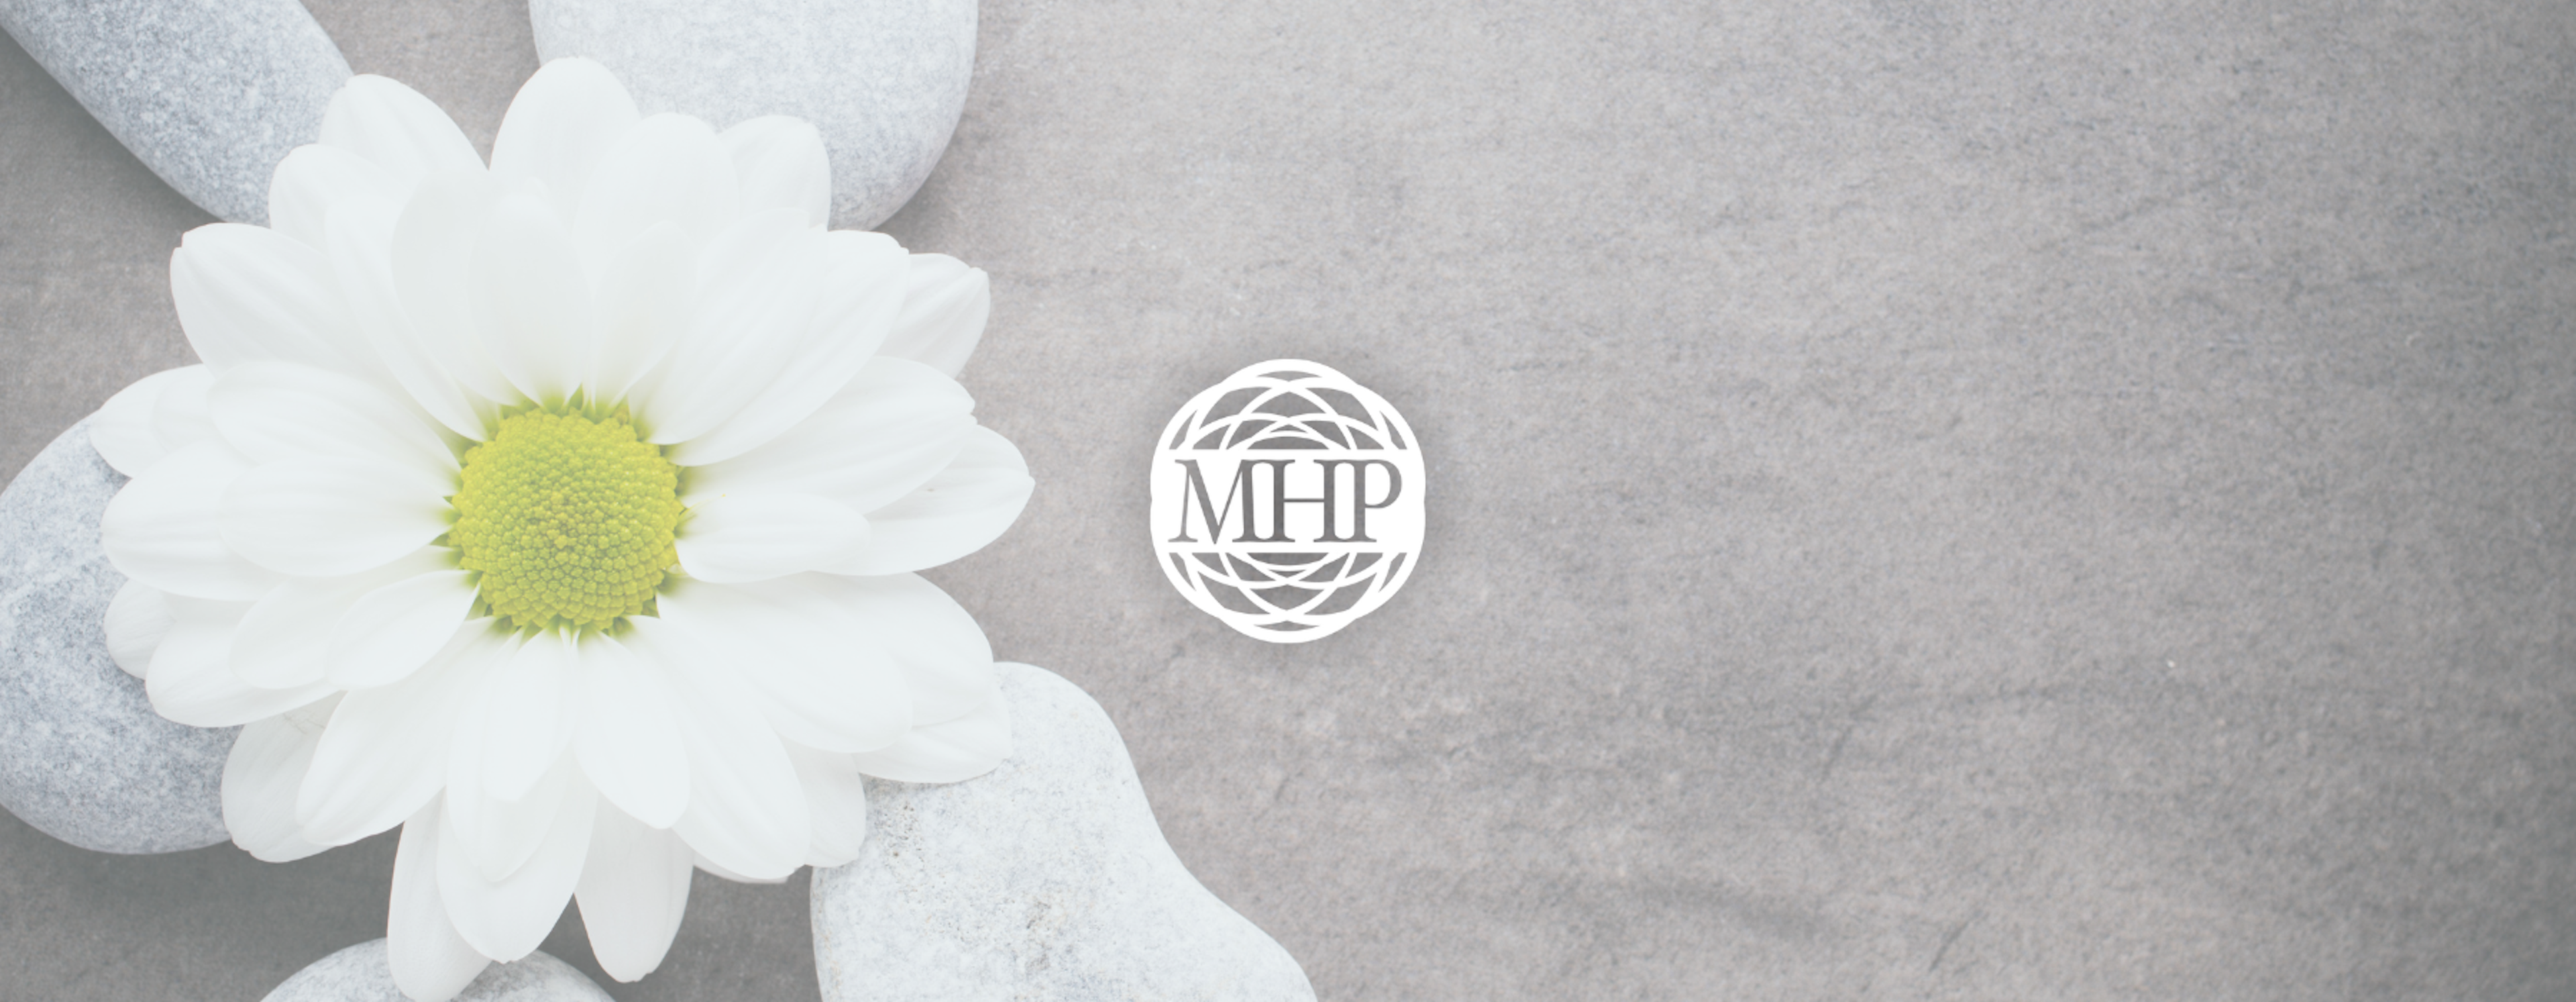 Wellness Blog Header - flower on a gray background with rocks